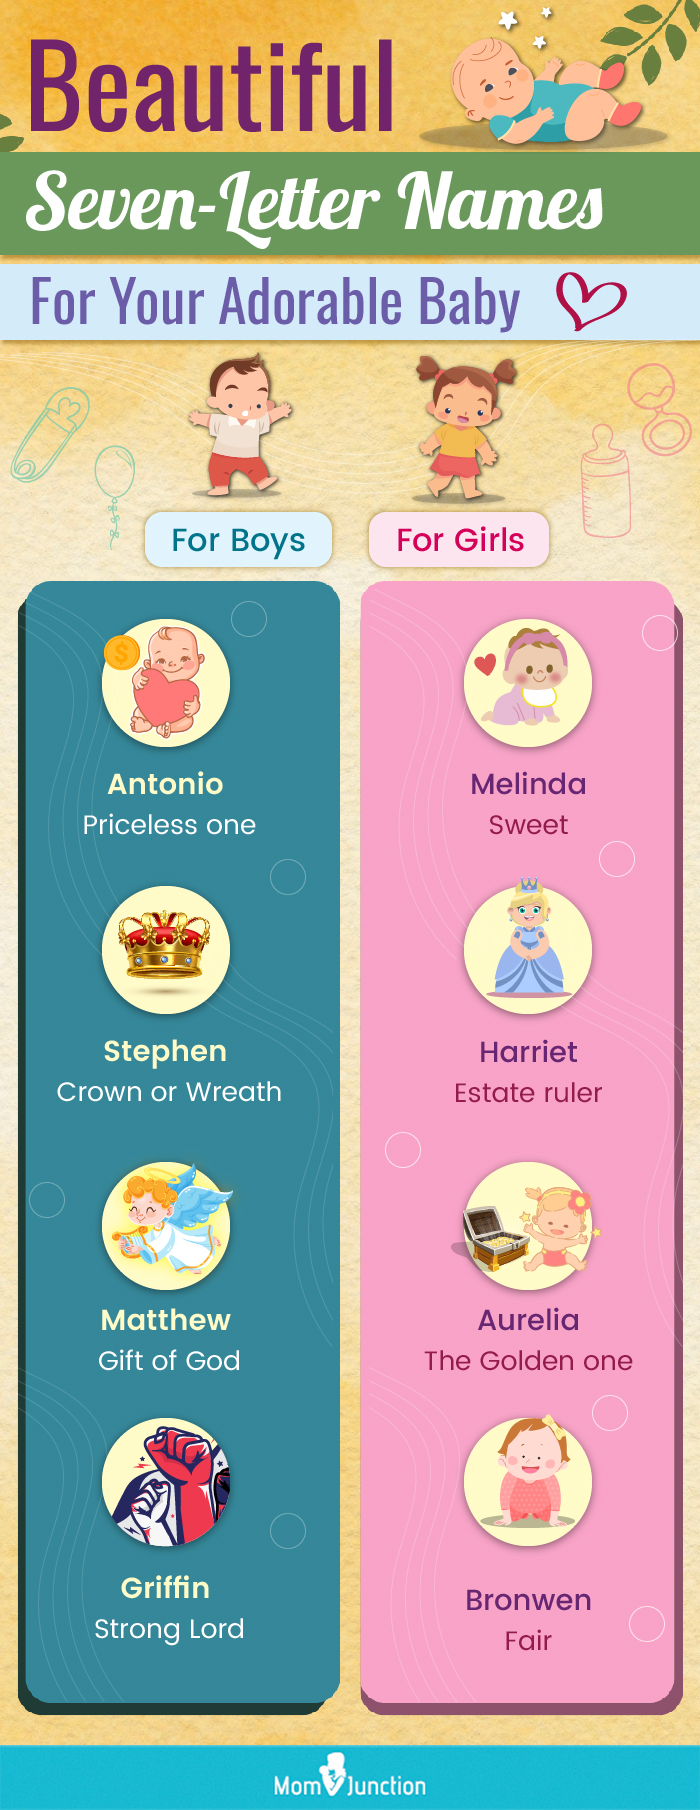 beautiful seven letter names for your adorable baby (infographic)